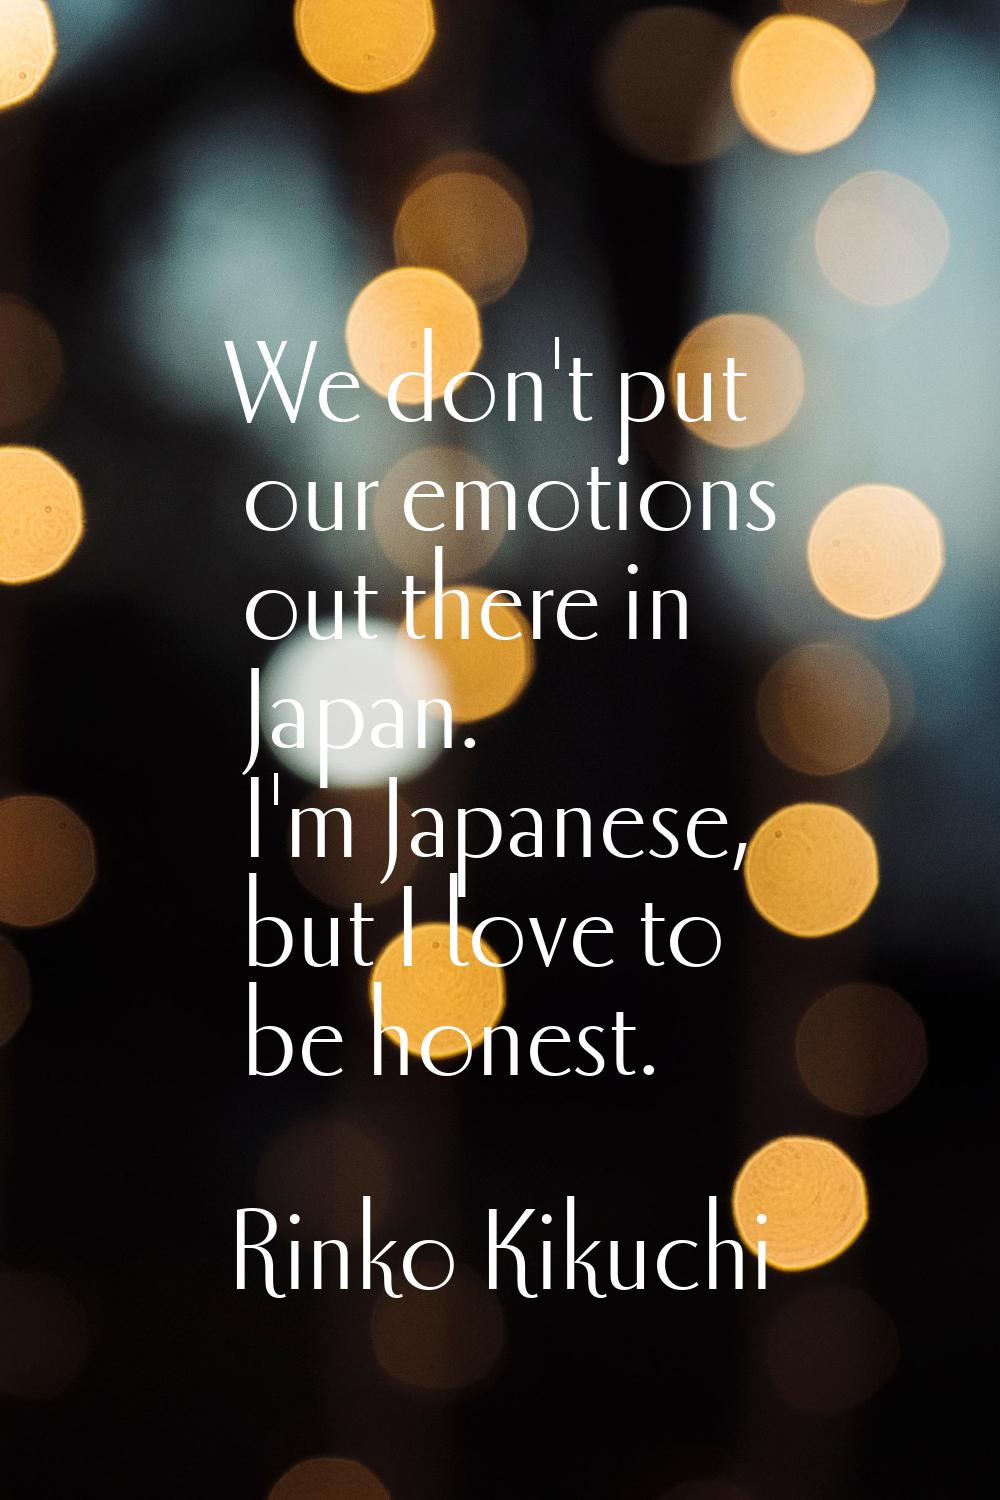 We don't put our emotions out there in Japan. I'm Japanese, but I love to be honest.